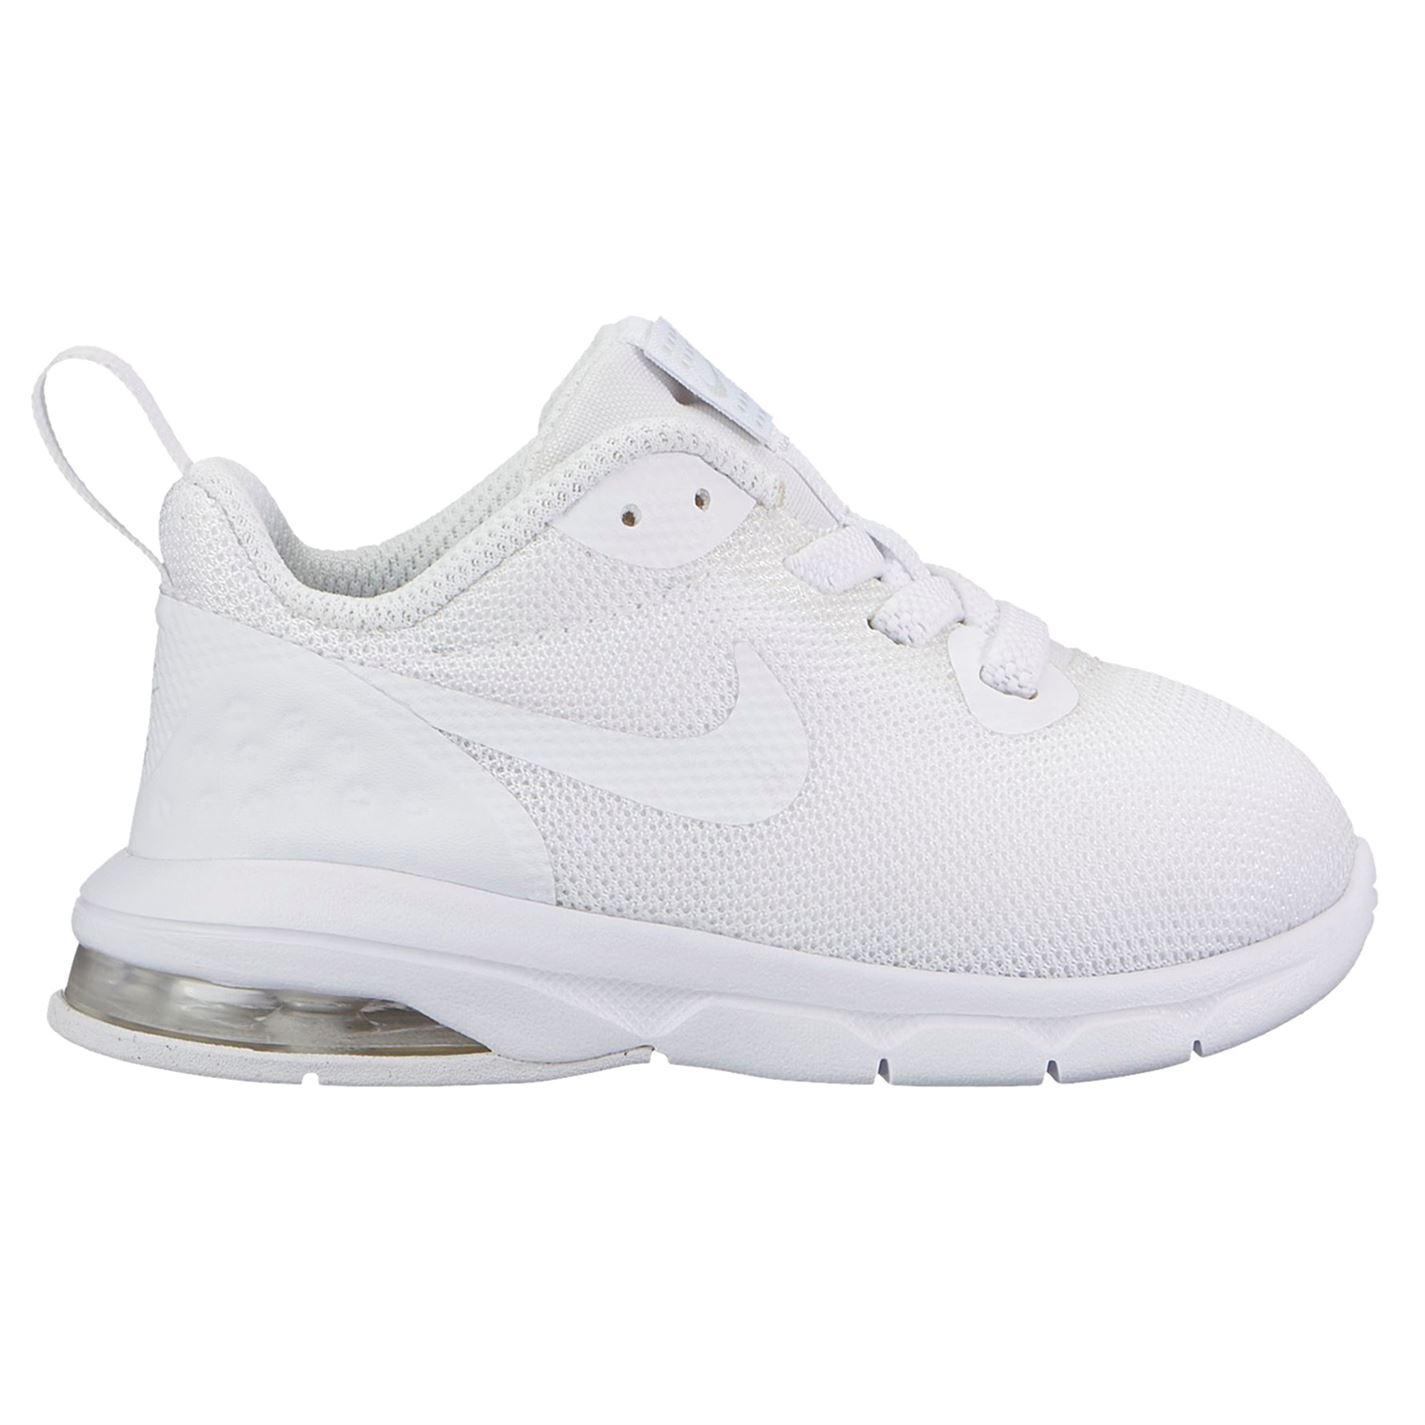 Nike Air Max Motion LW Trainers Infant Boys